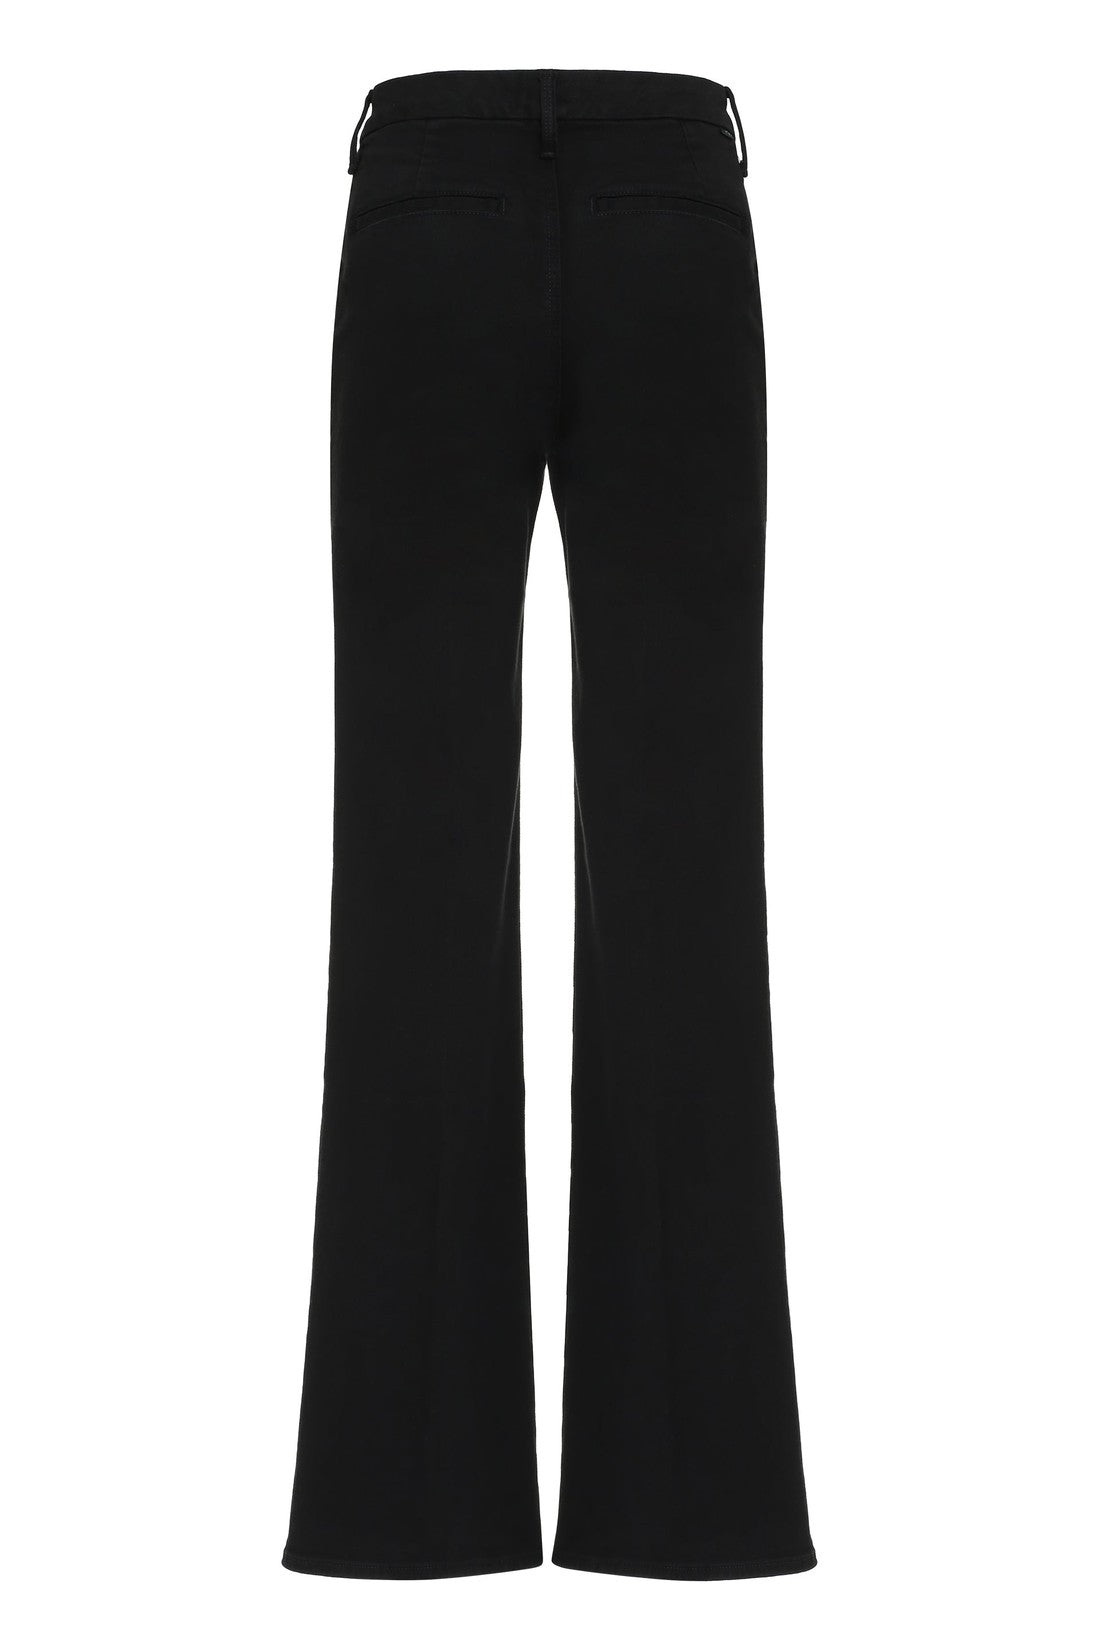 Mother-OUTLET-SALE-The Roller Prep flared trousers-ARCHIVIST